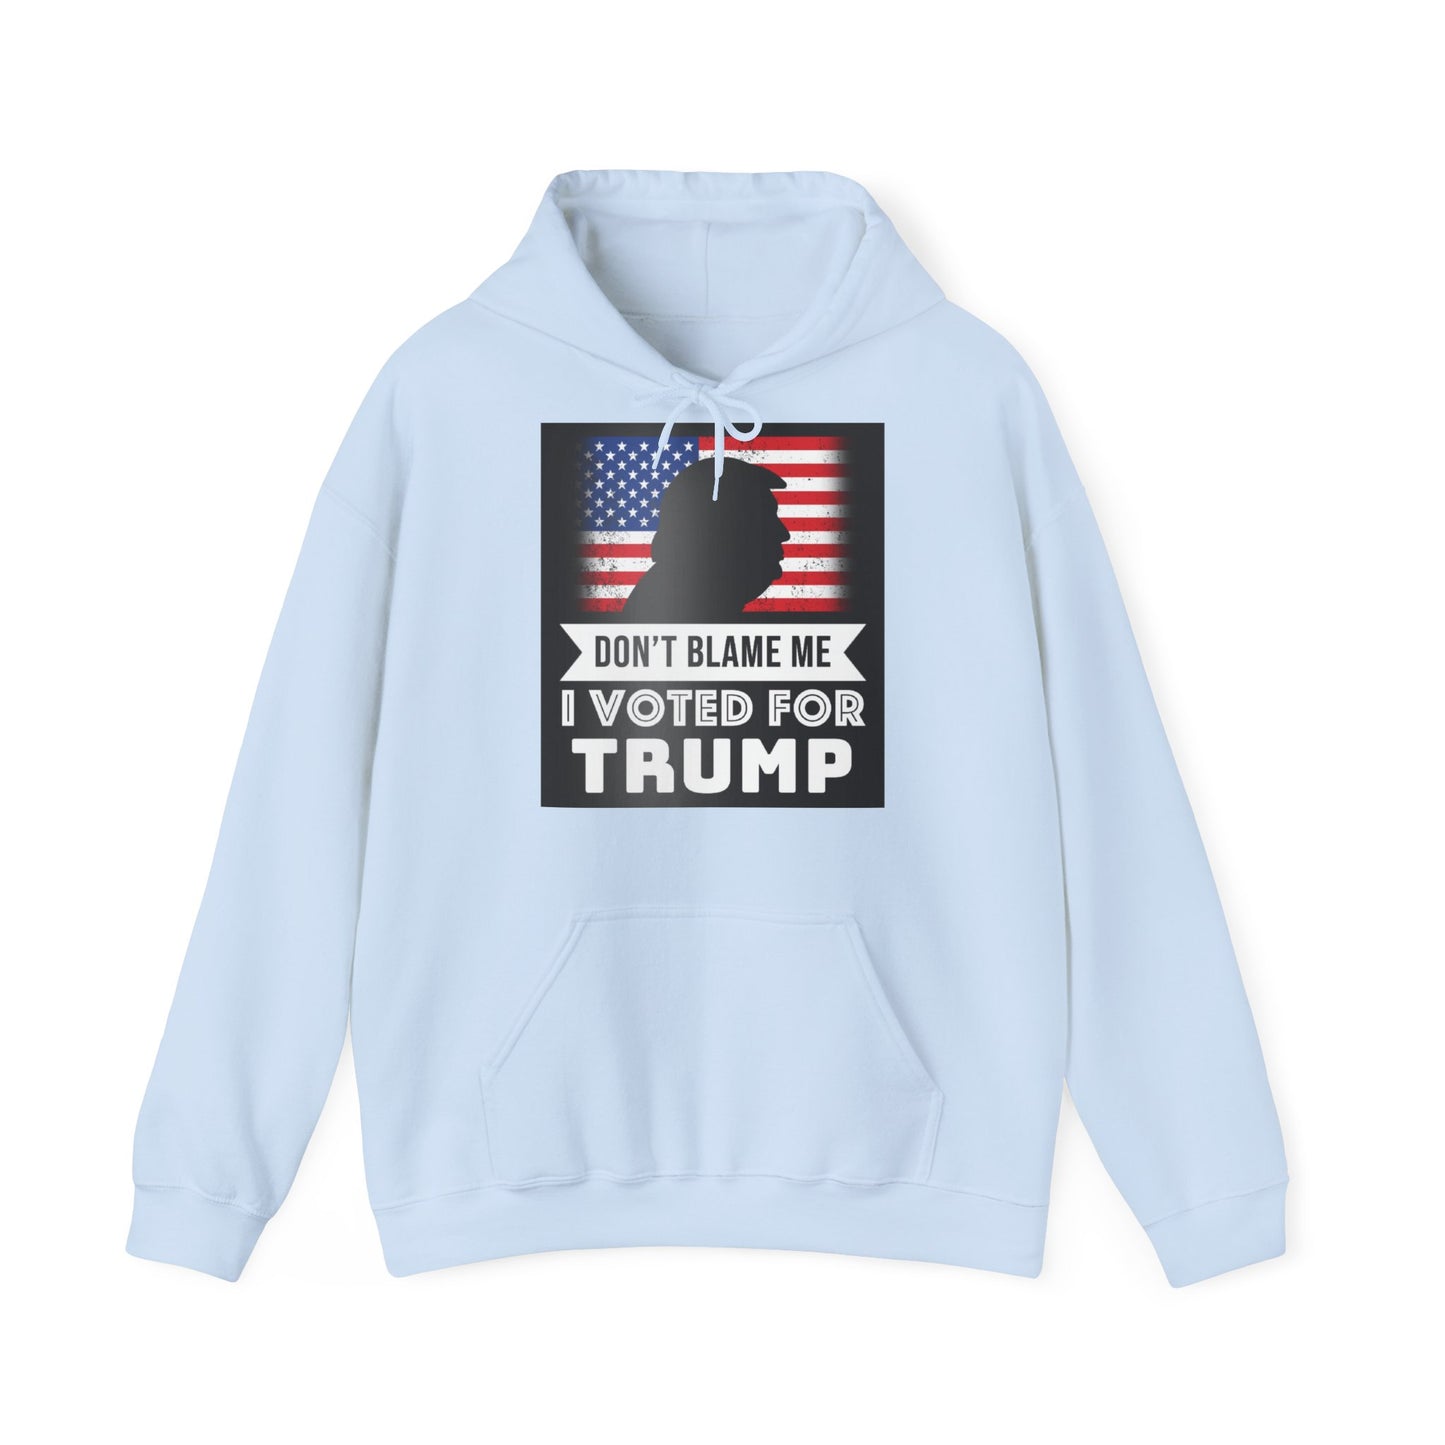 DON'T BLAME ME, I VOTED FOR TRUMP hoodie